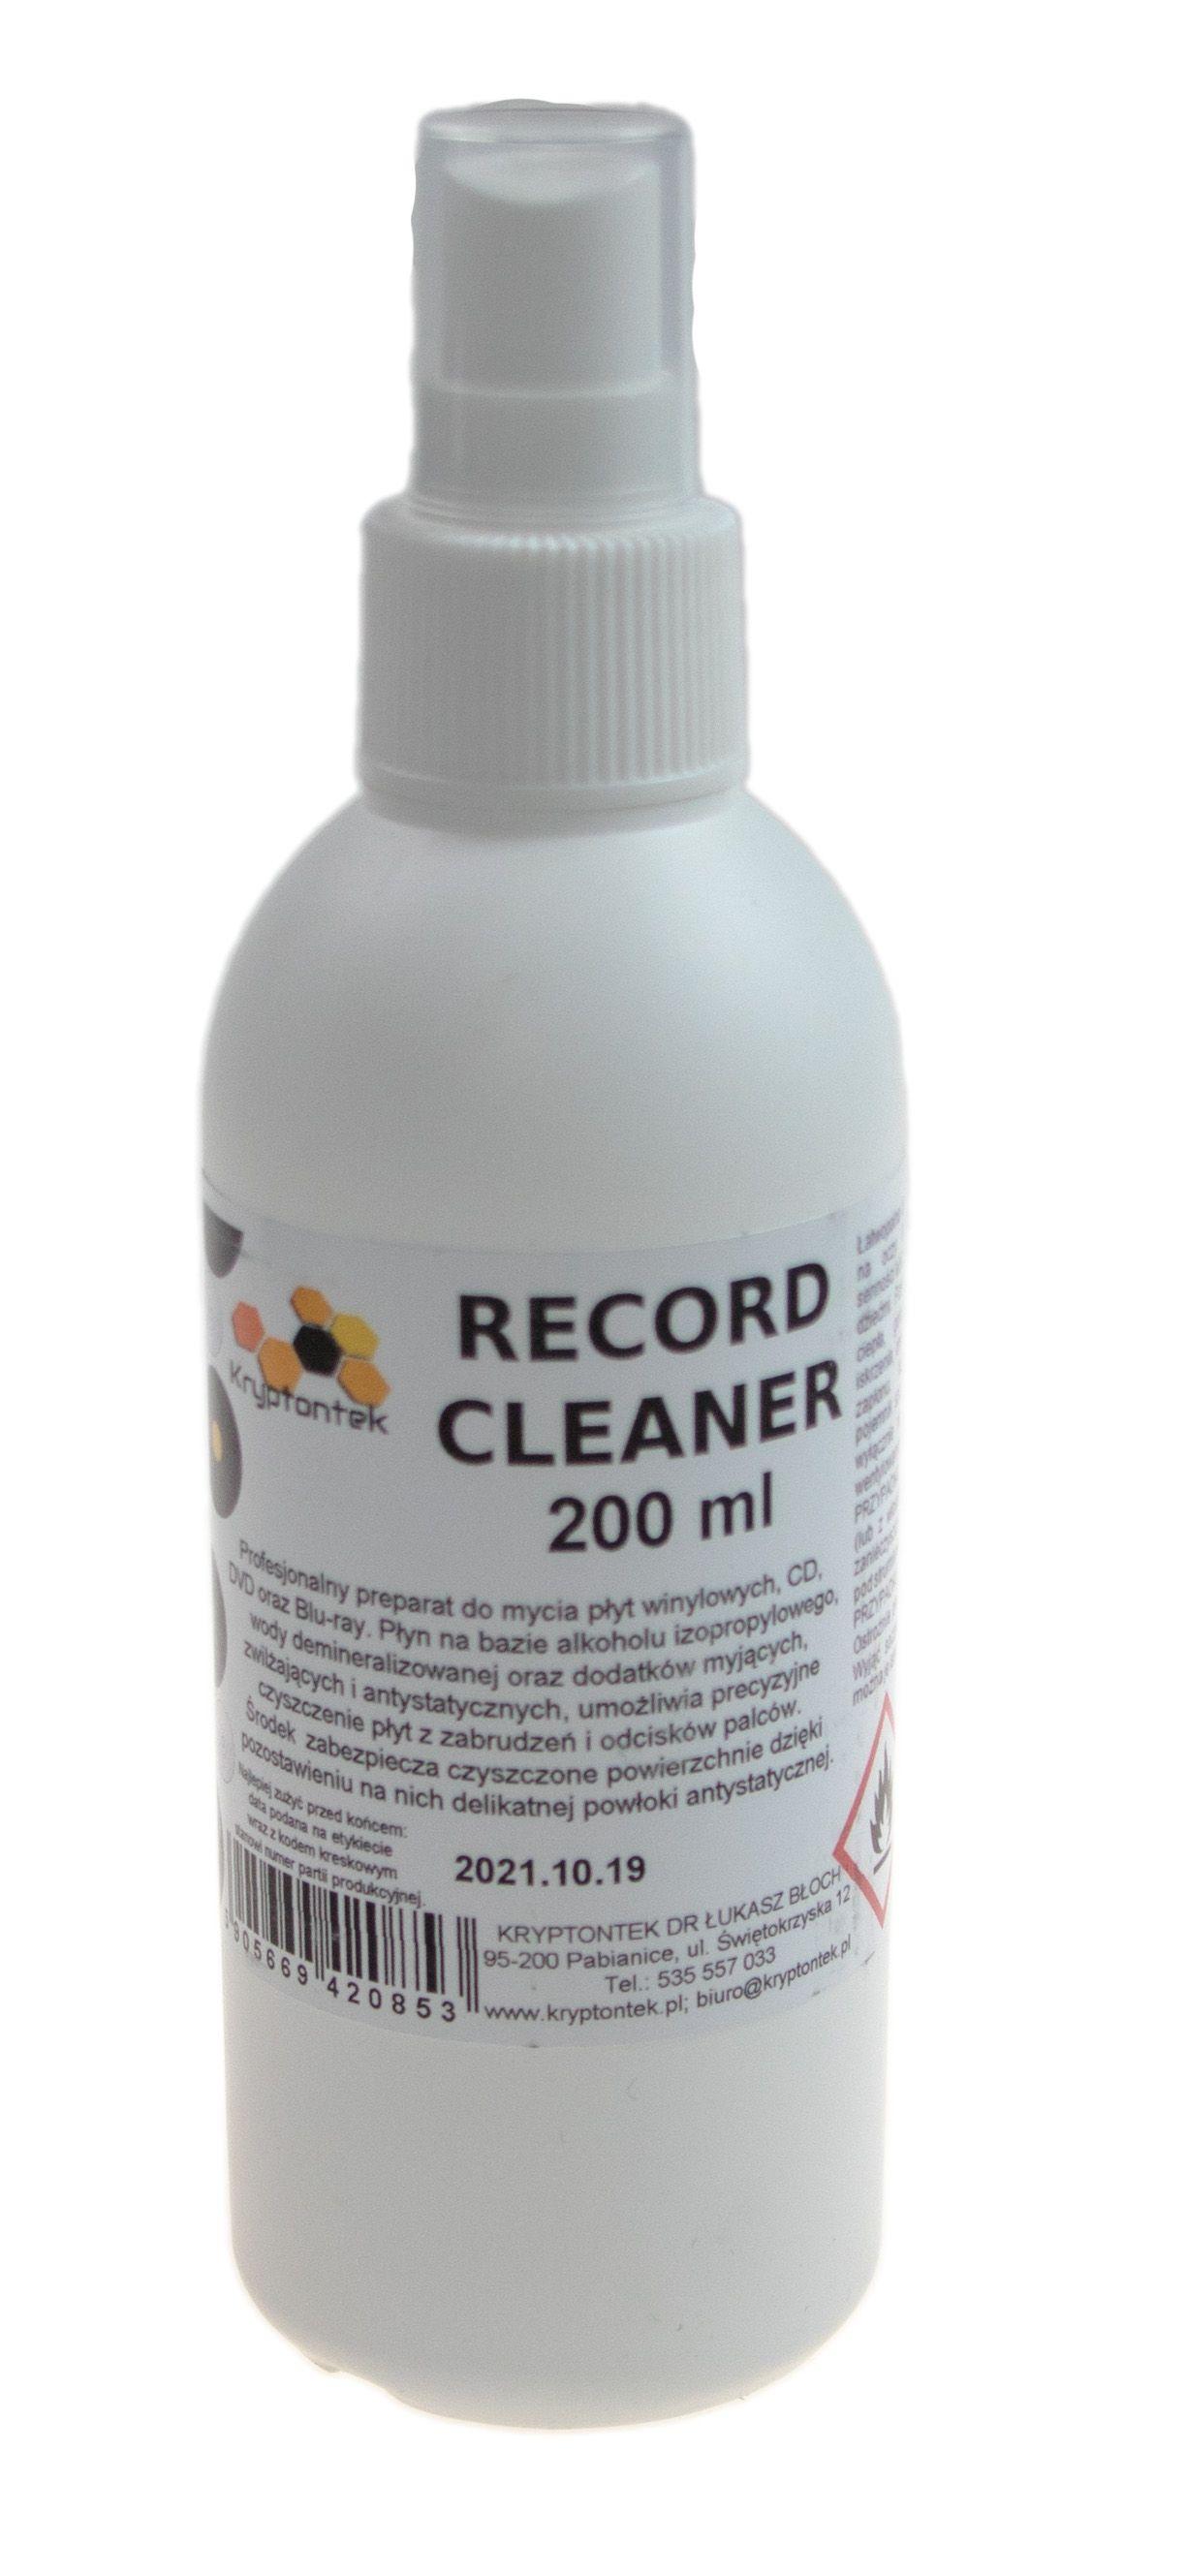 Record cleaner 200ml with atomizer